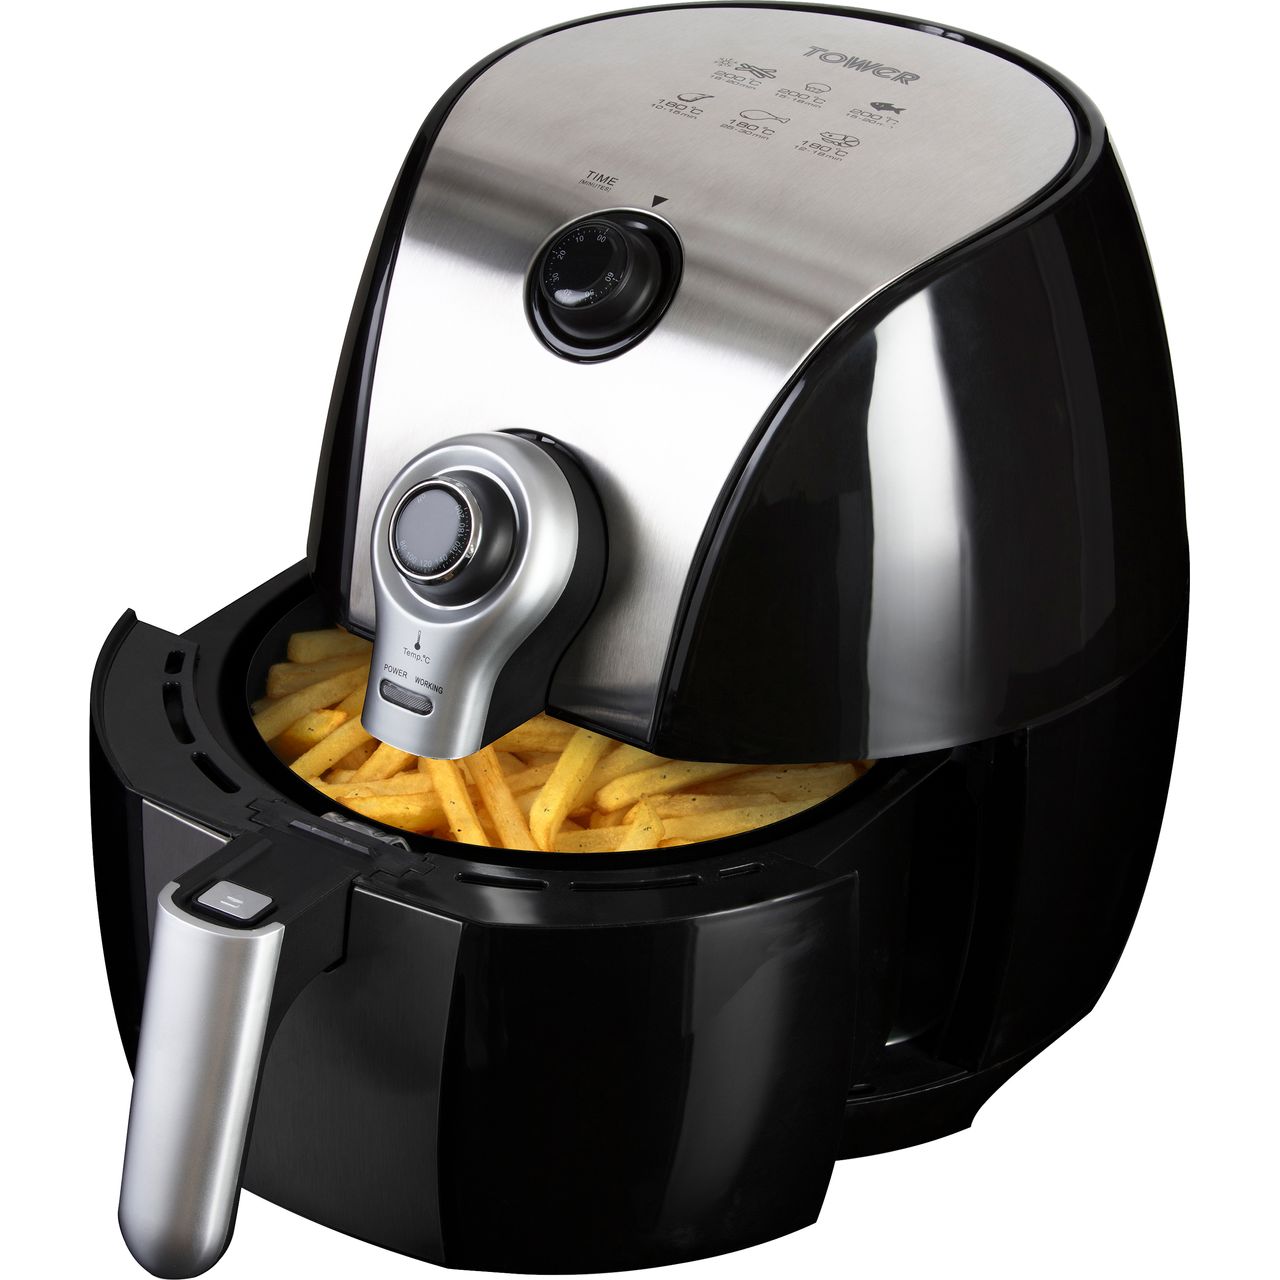 Tower T17022 Air Fryer Review